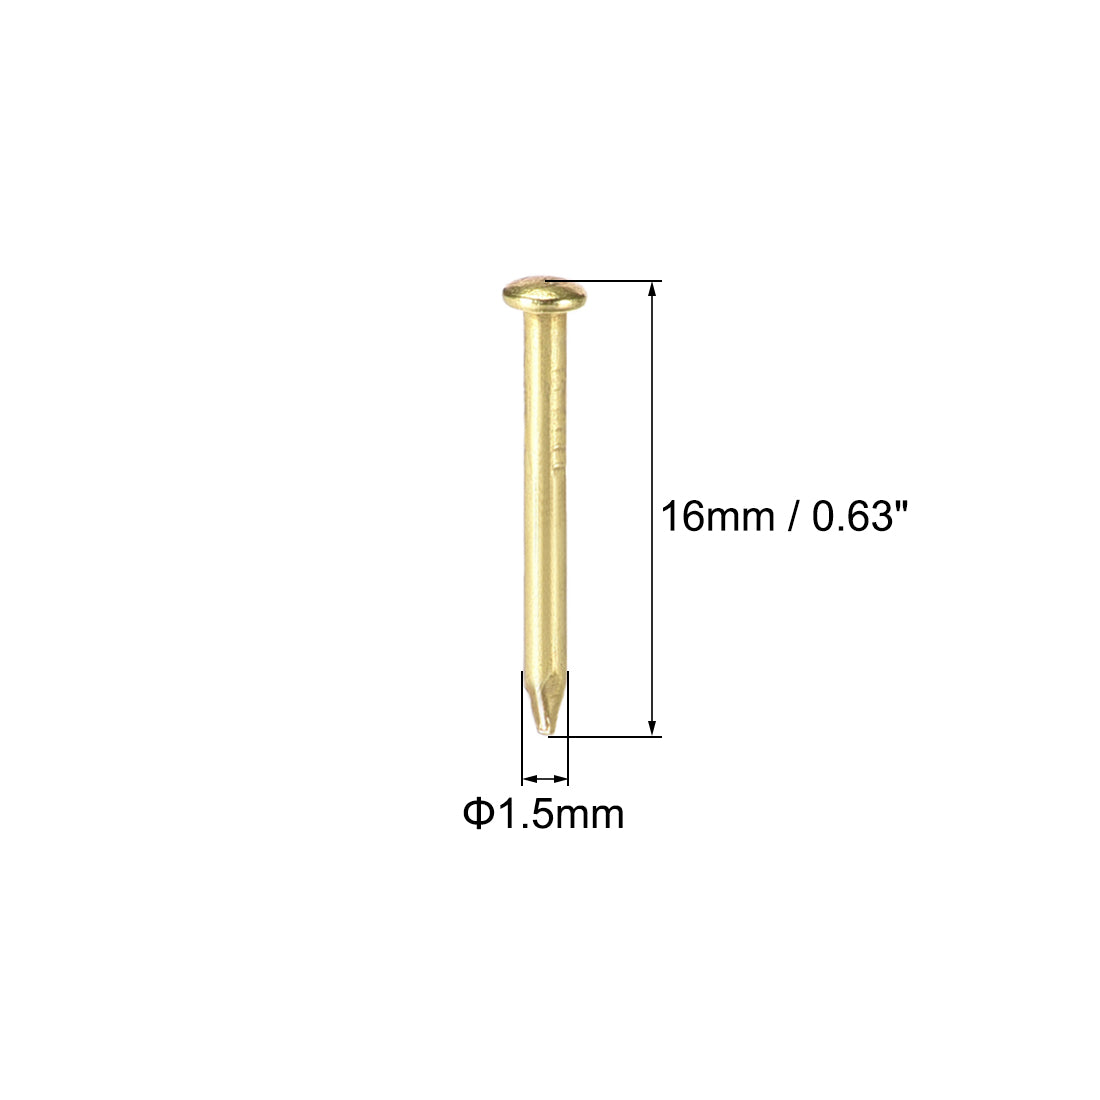 Uxcell Uxcell Small Tiny Nails 1.5X8mm for DIY Decorative Wooden Boxes Gold Tone 100pcs